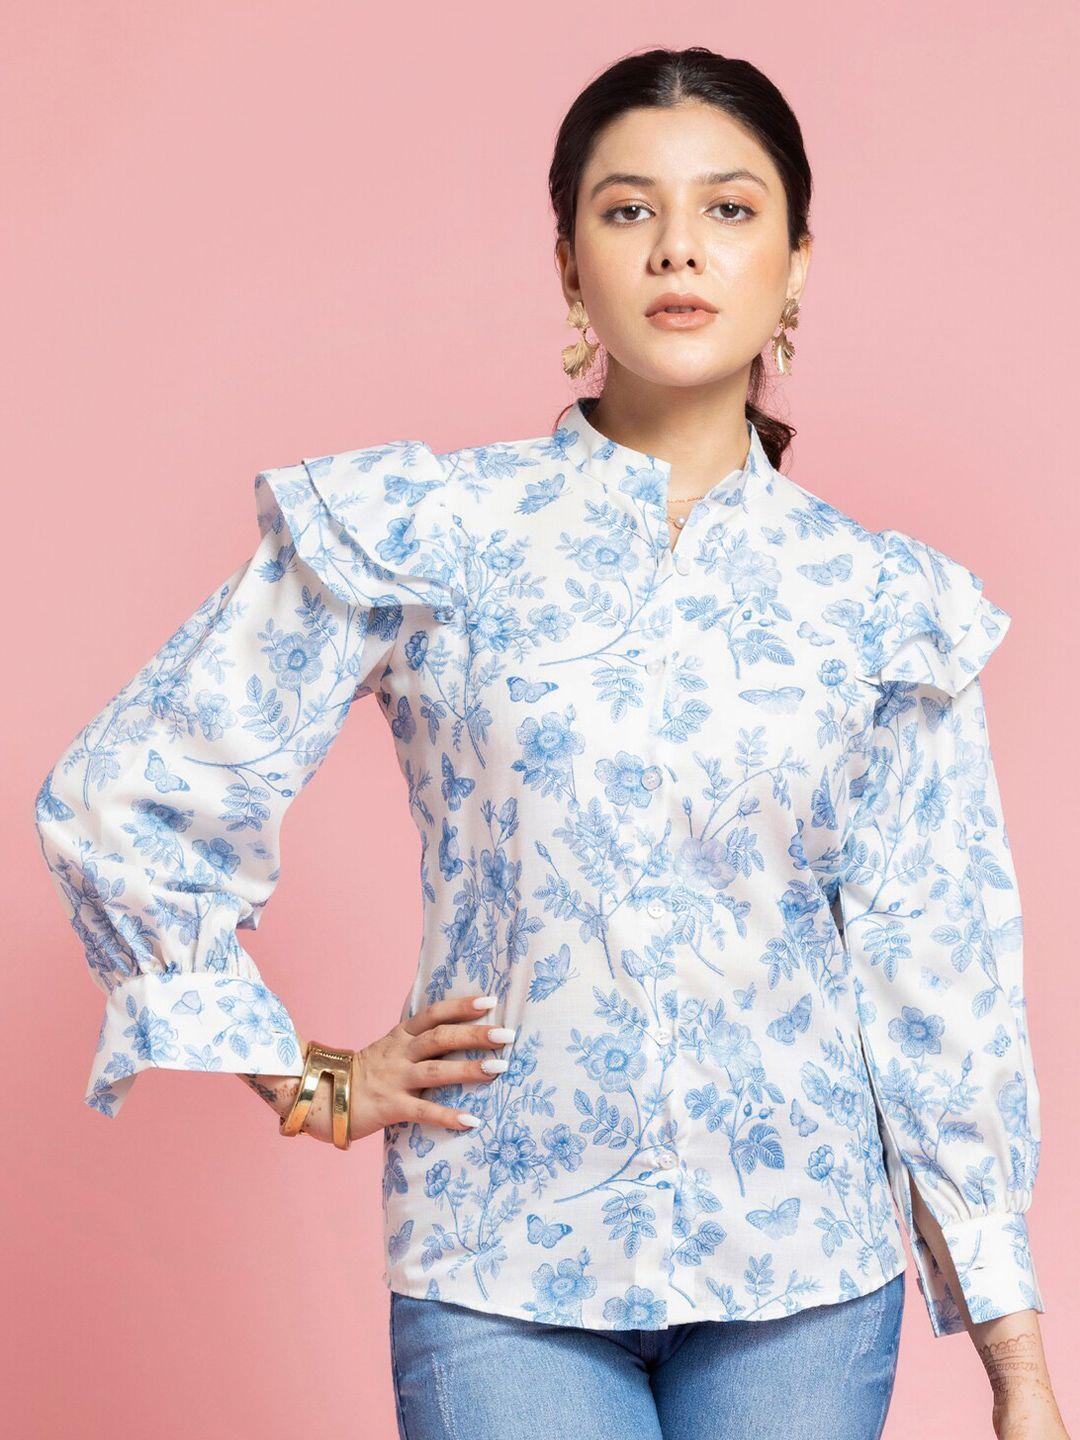 sew you soon white floral print mandarin collar flutter sleeve cotton shirt style top